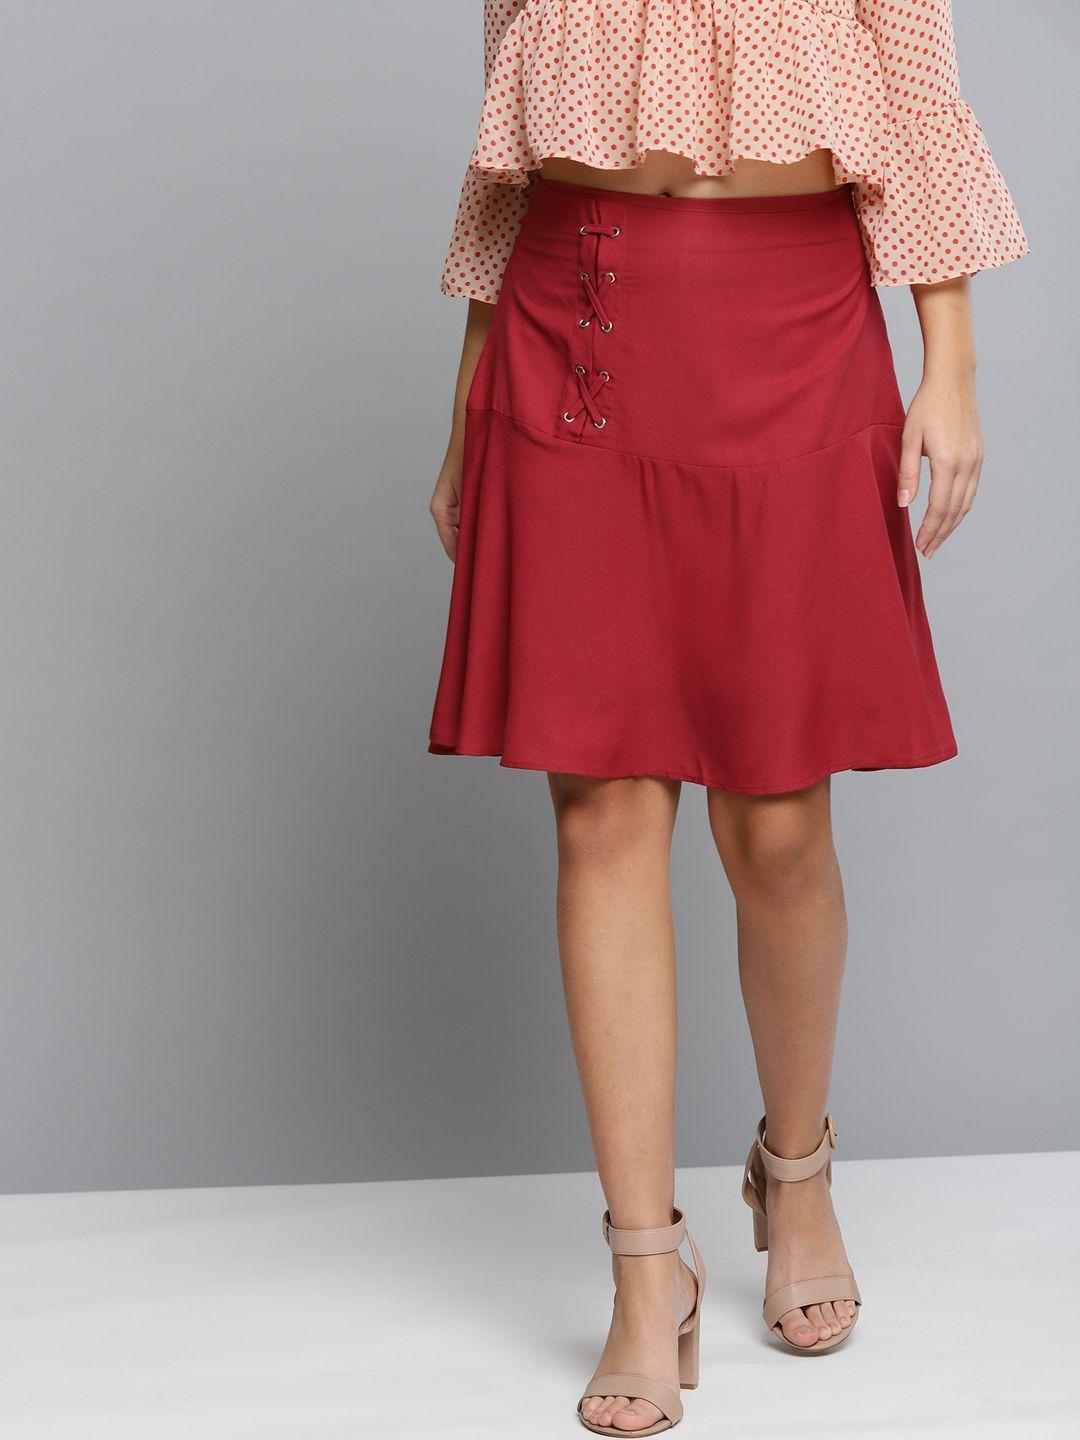 carlton london women red solid a-line skirt